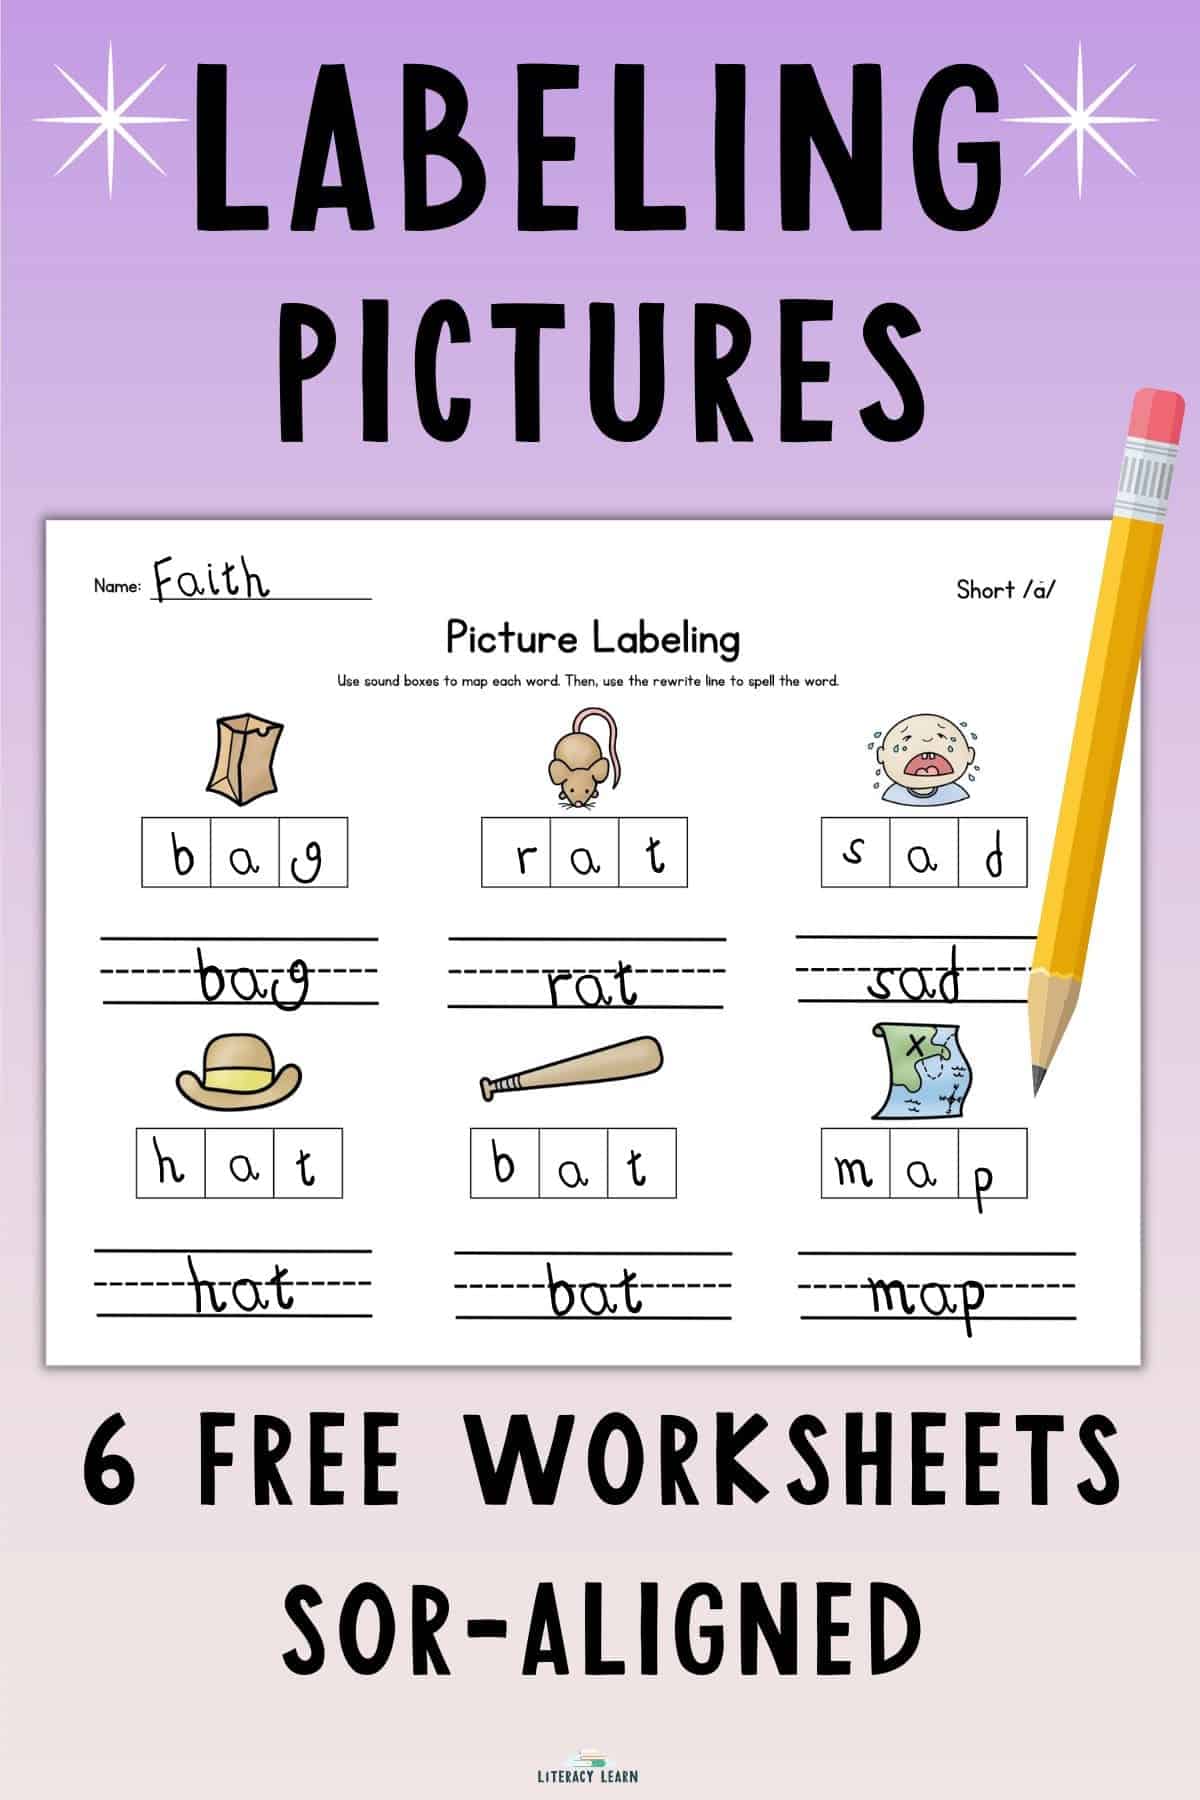 Purple background with title "Labeling Pictures" and sample complete worksheet with a pencil.